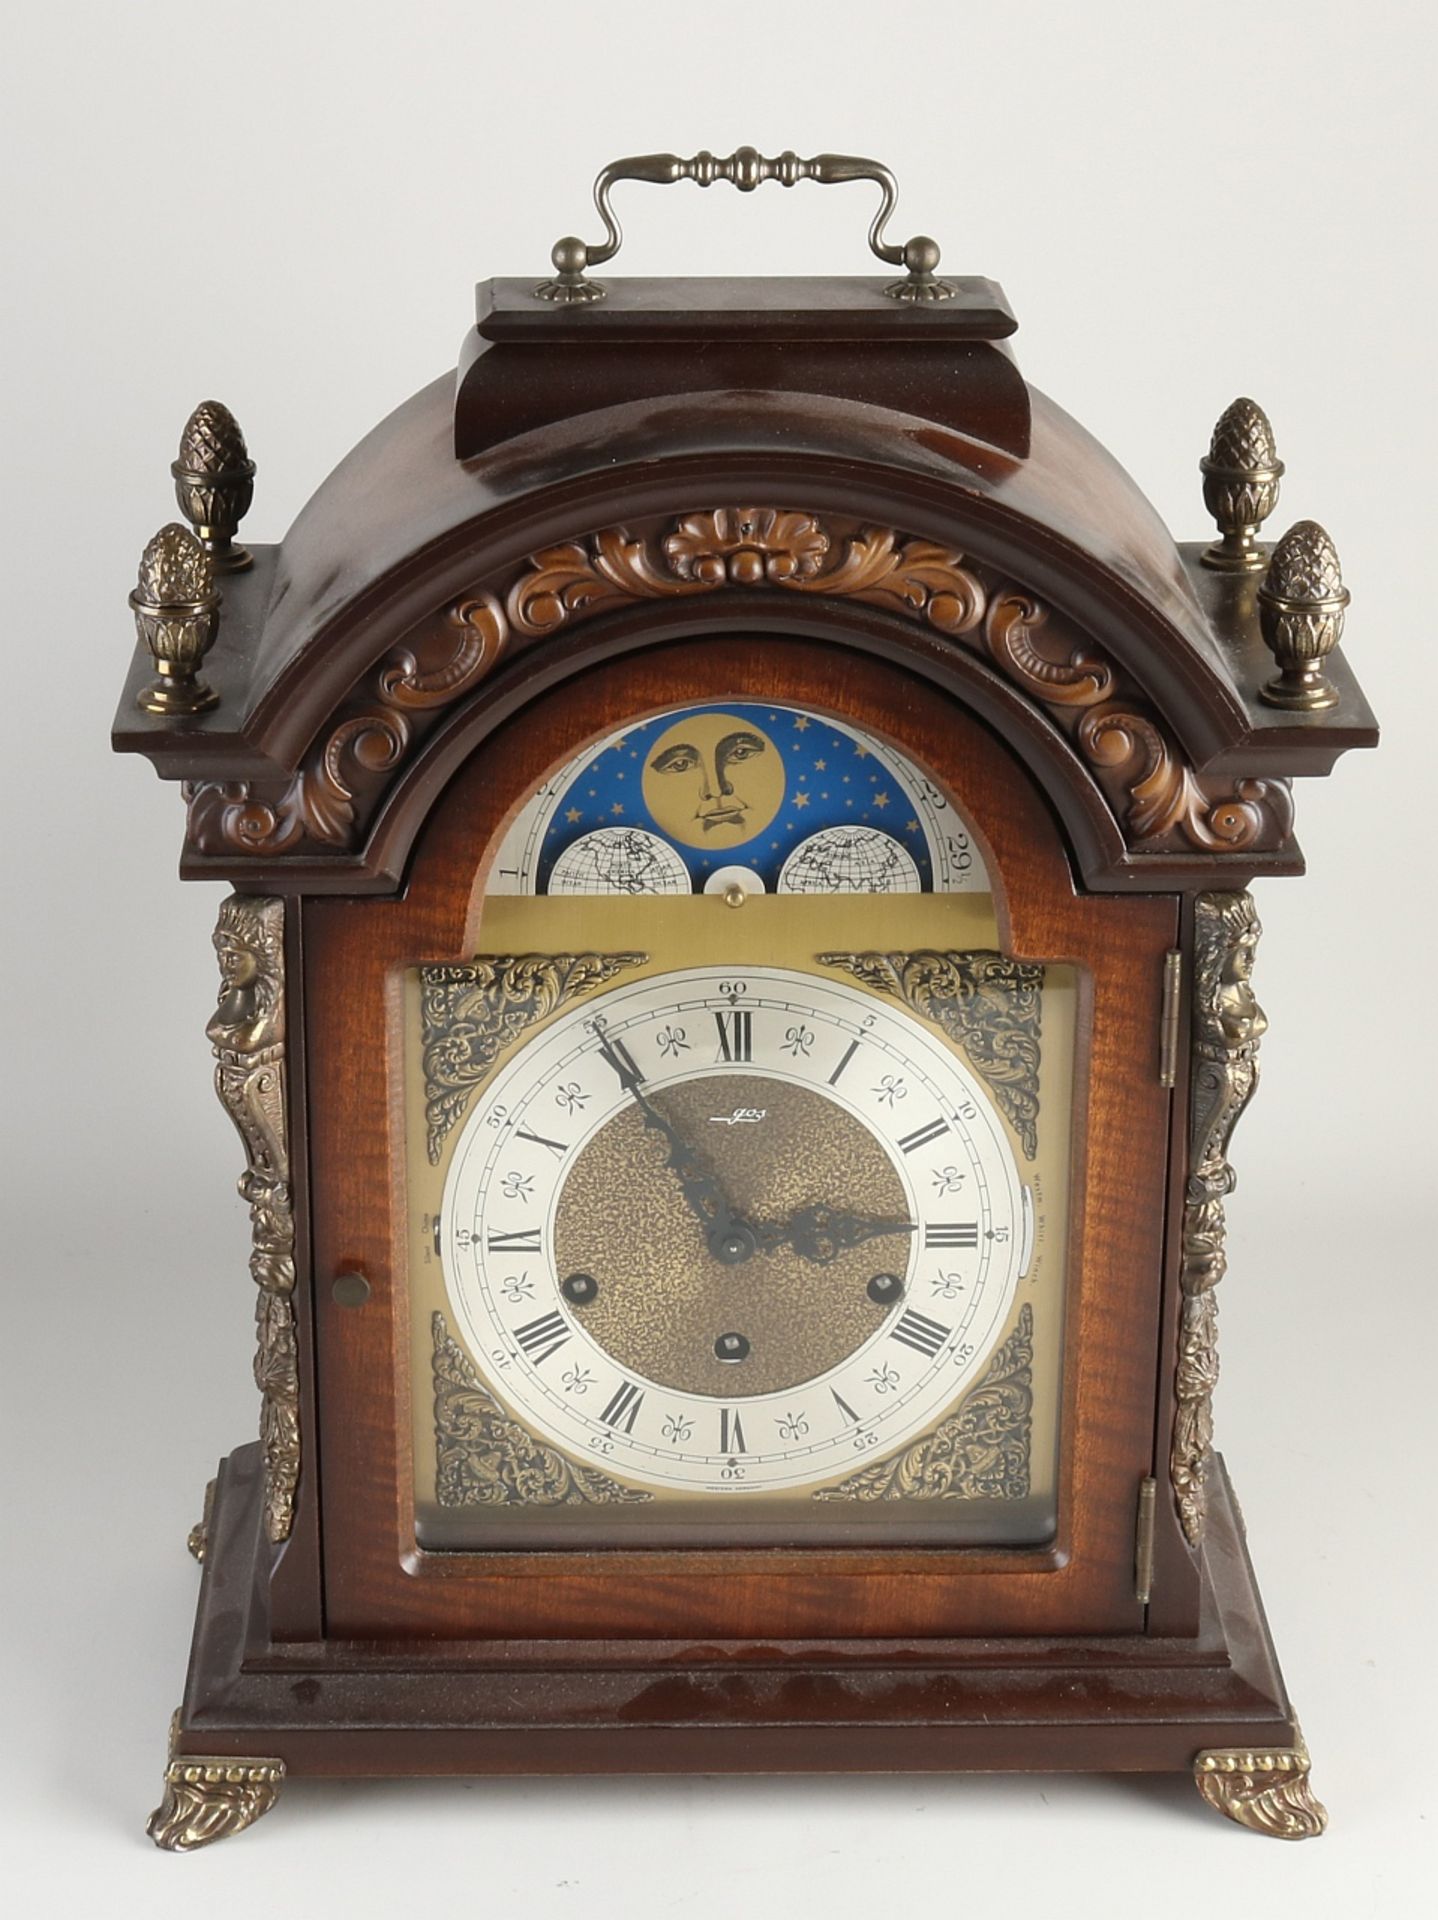 Westminster table clock